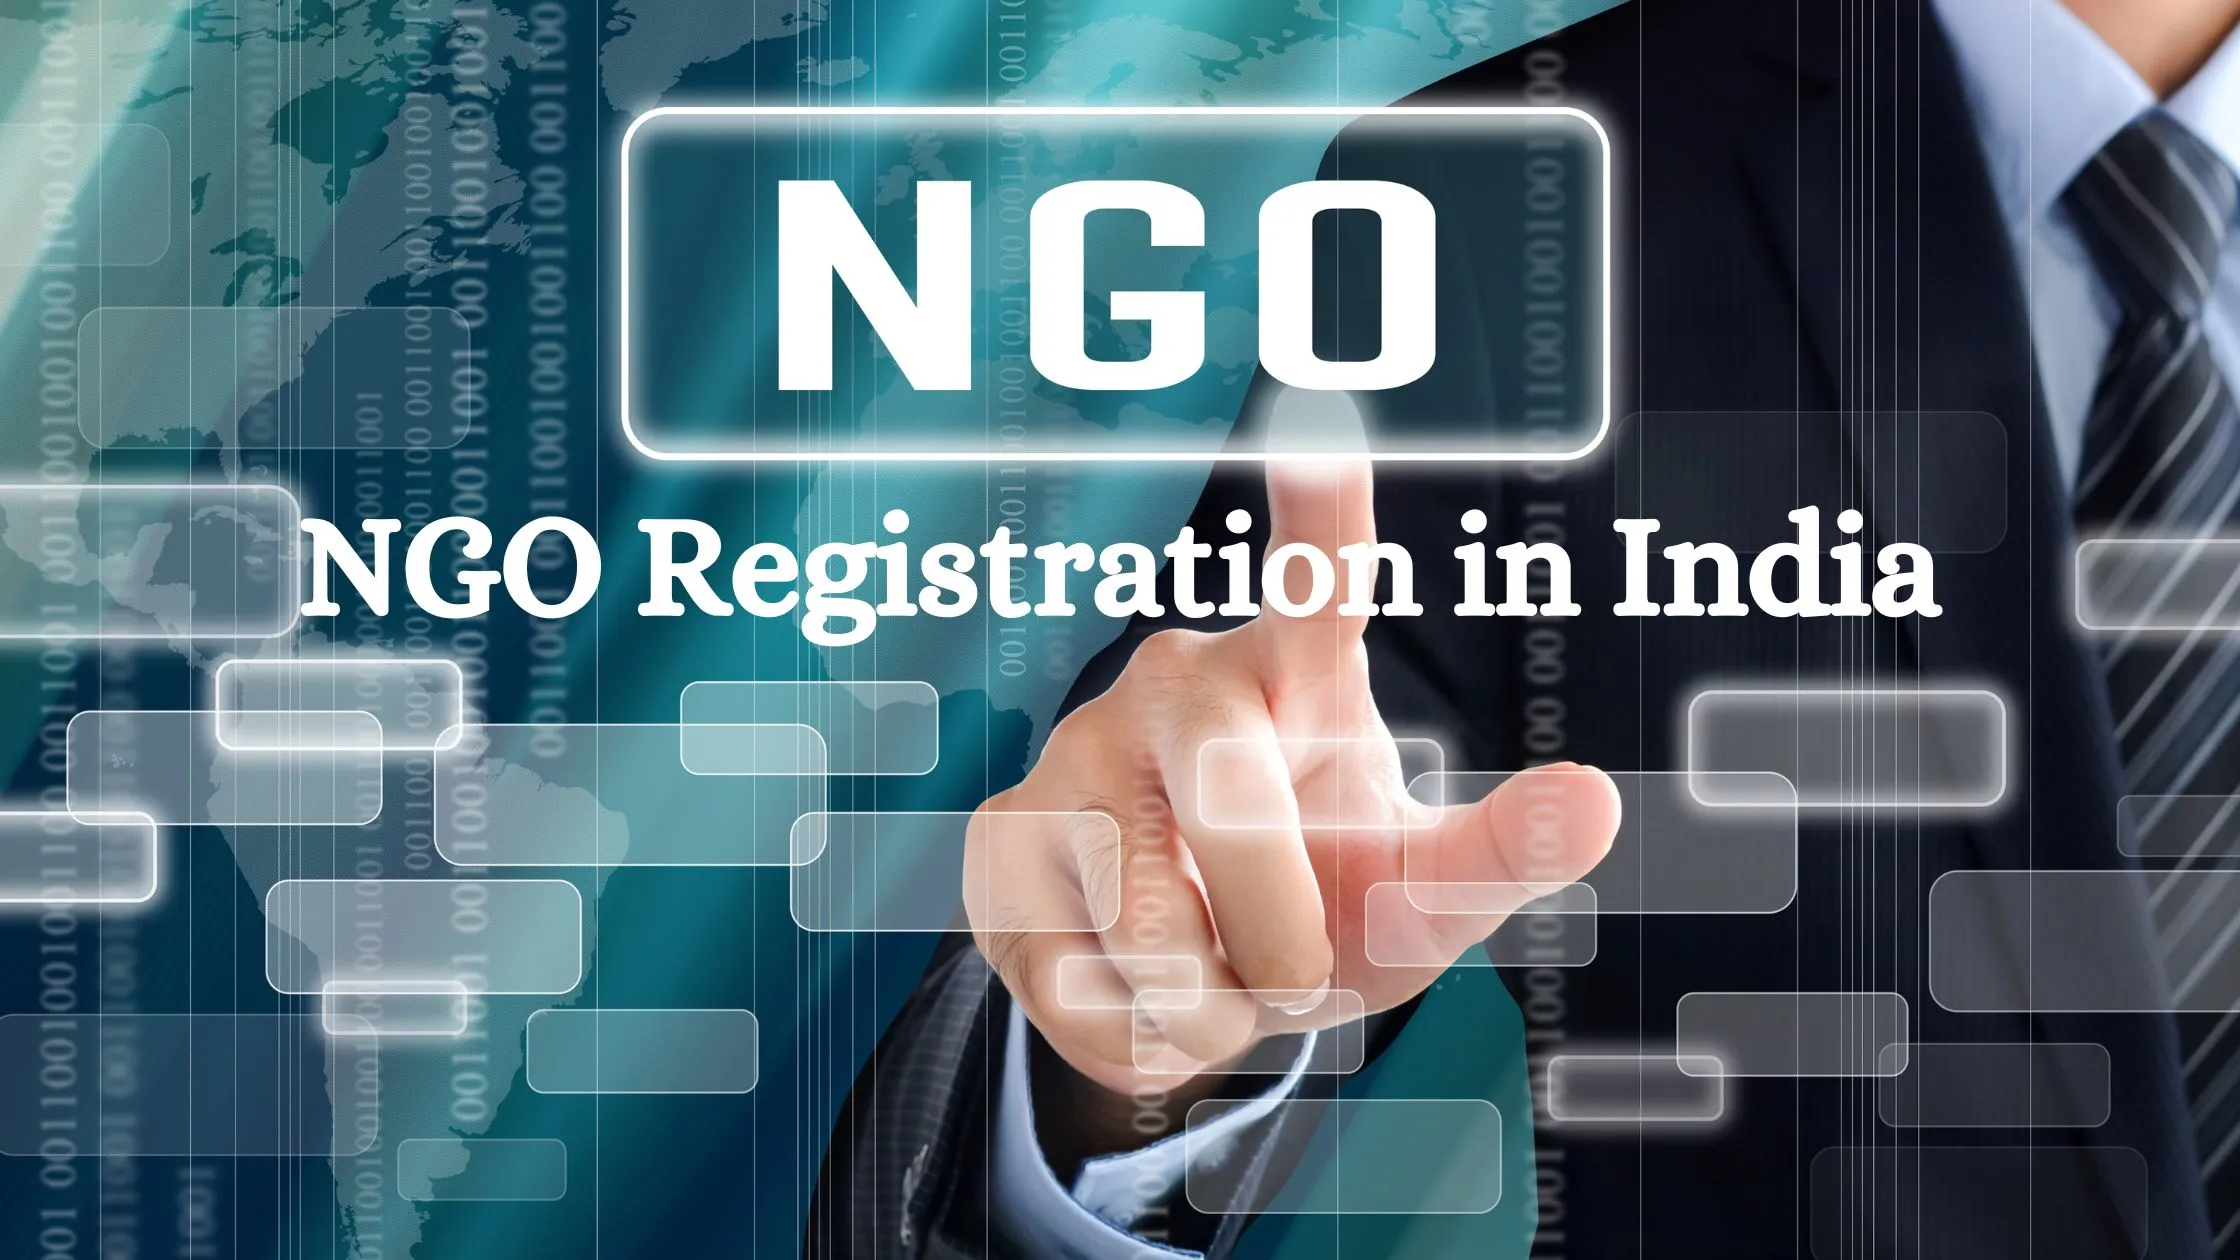 NGO Registration in India | NGO Registration Process and Requirements